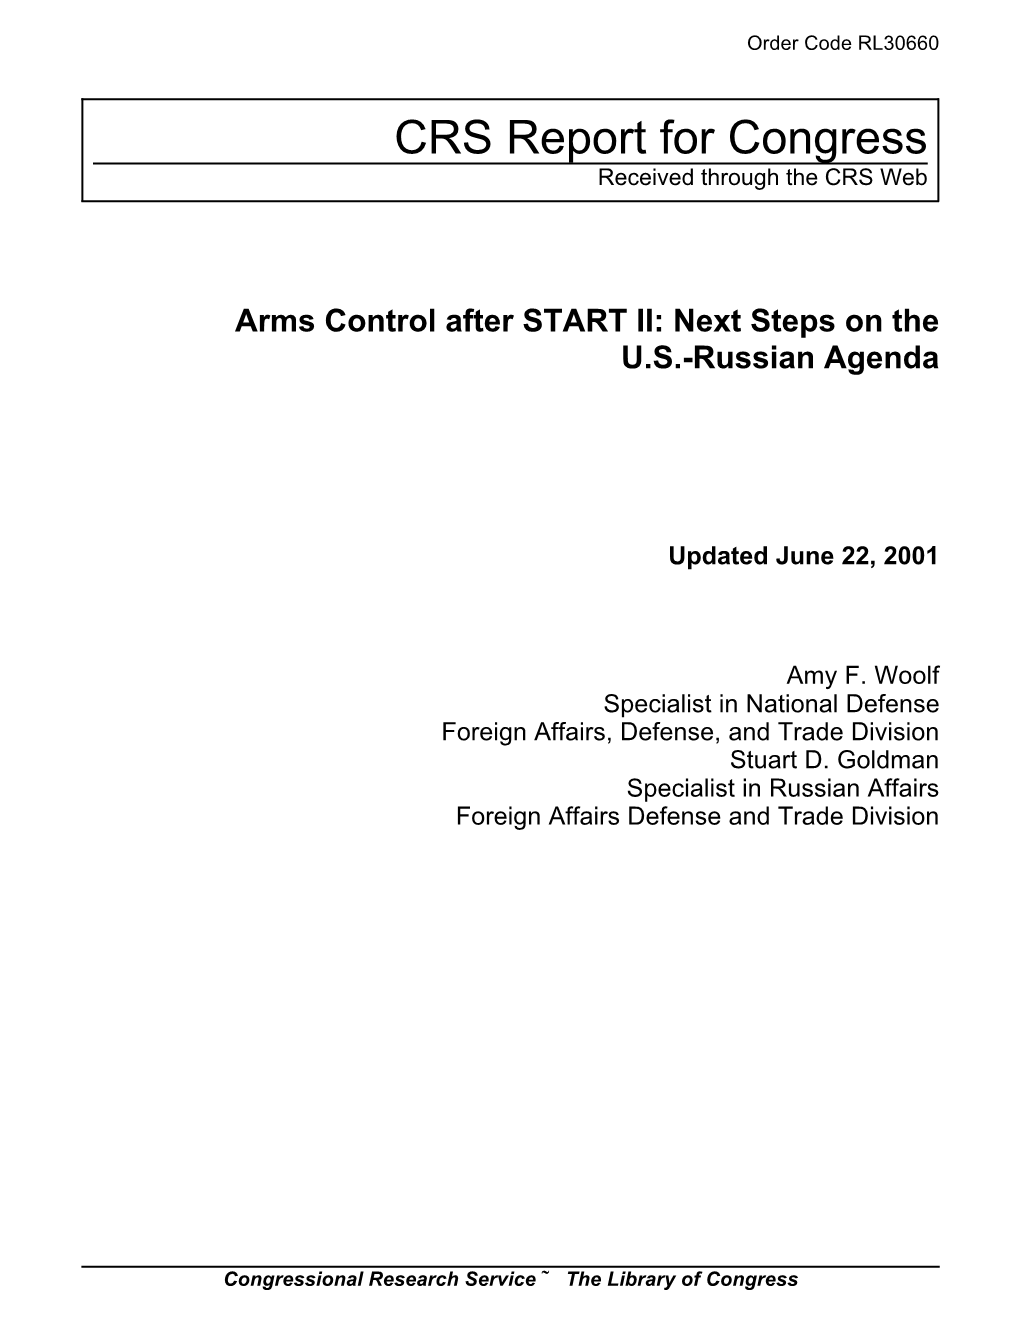 Arms Control After START II: Next Steps on the U.S.-Russian Agenda